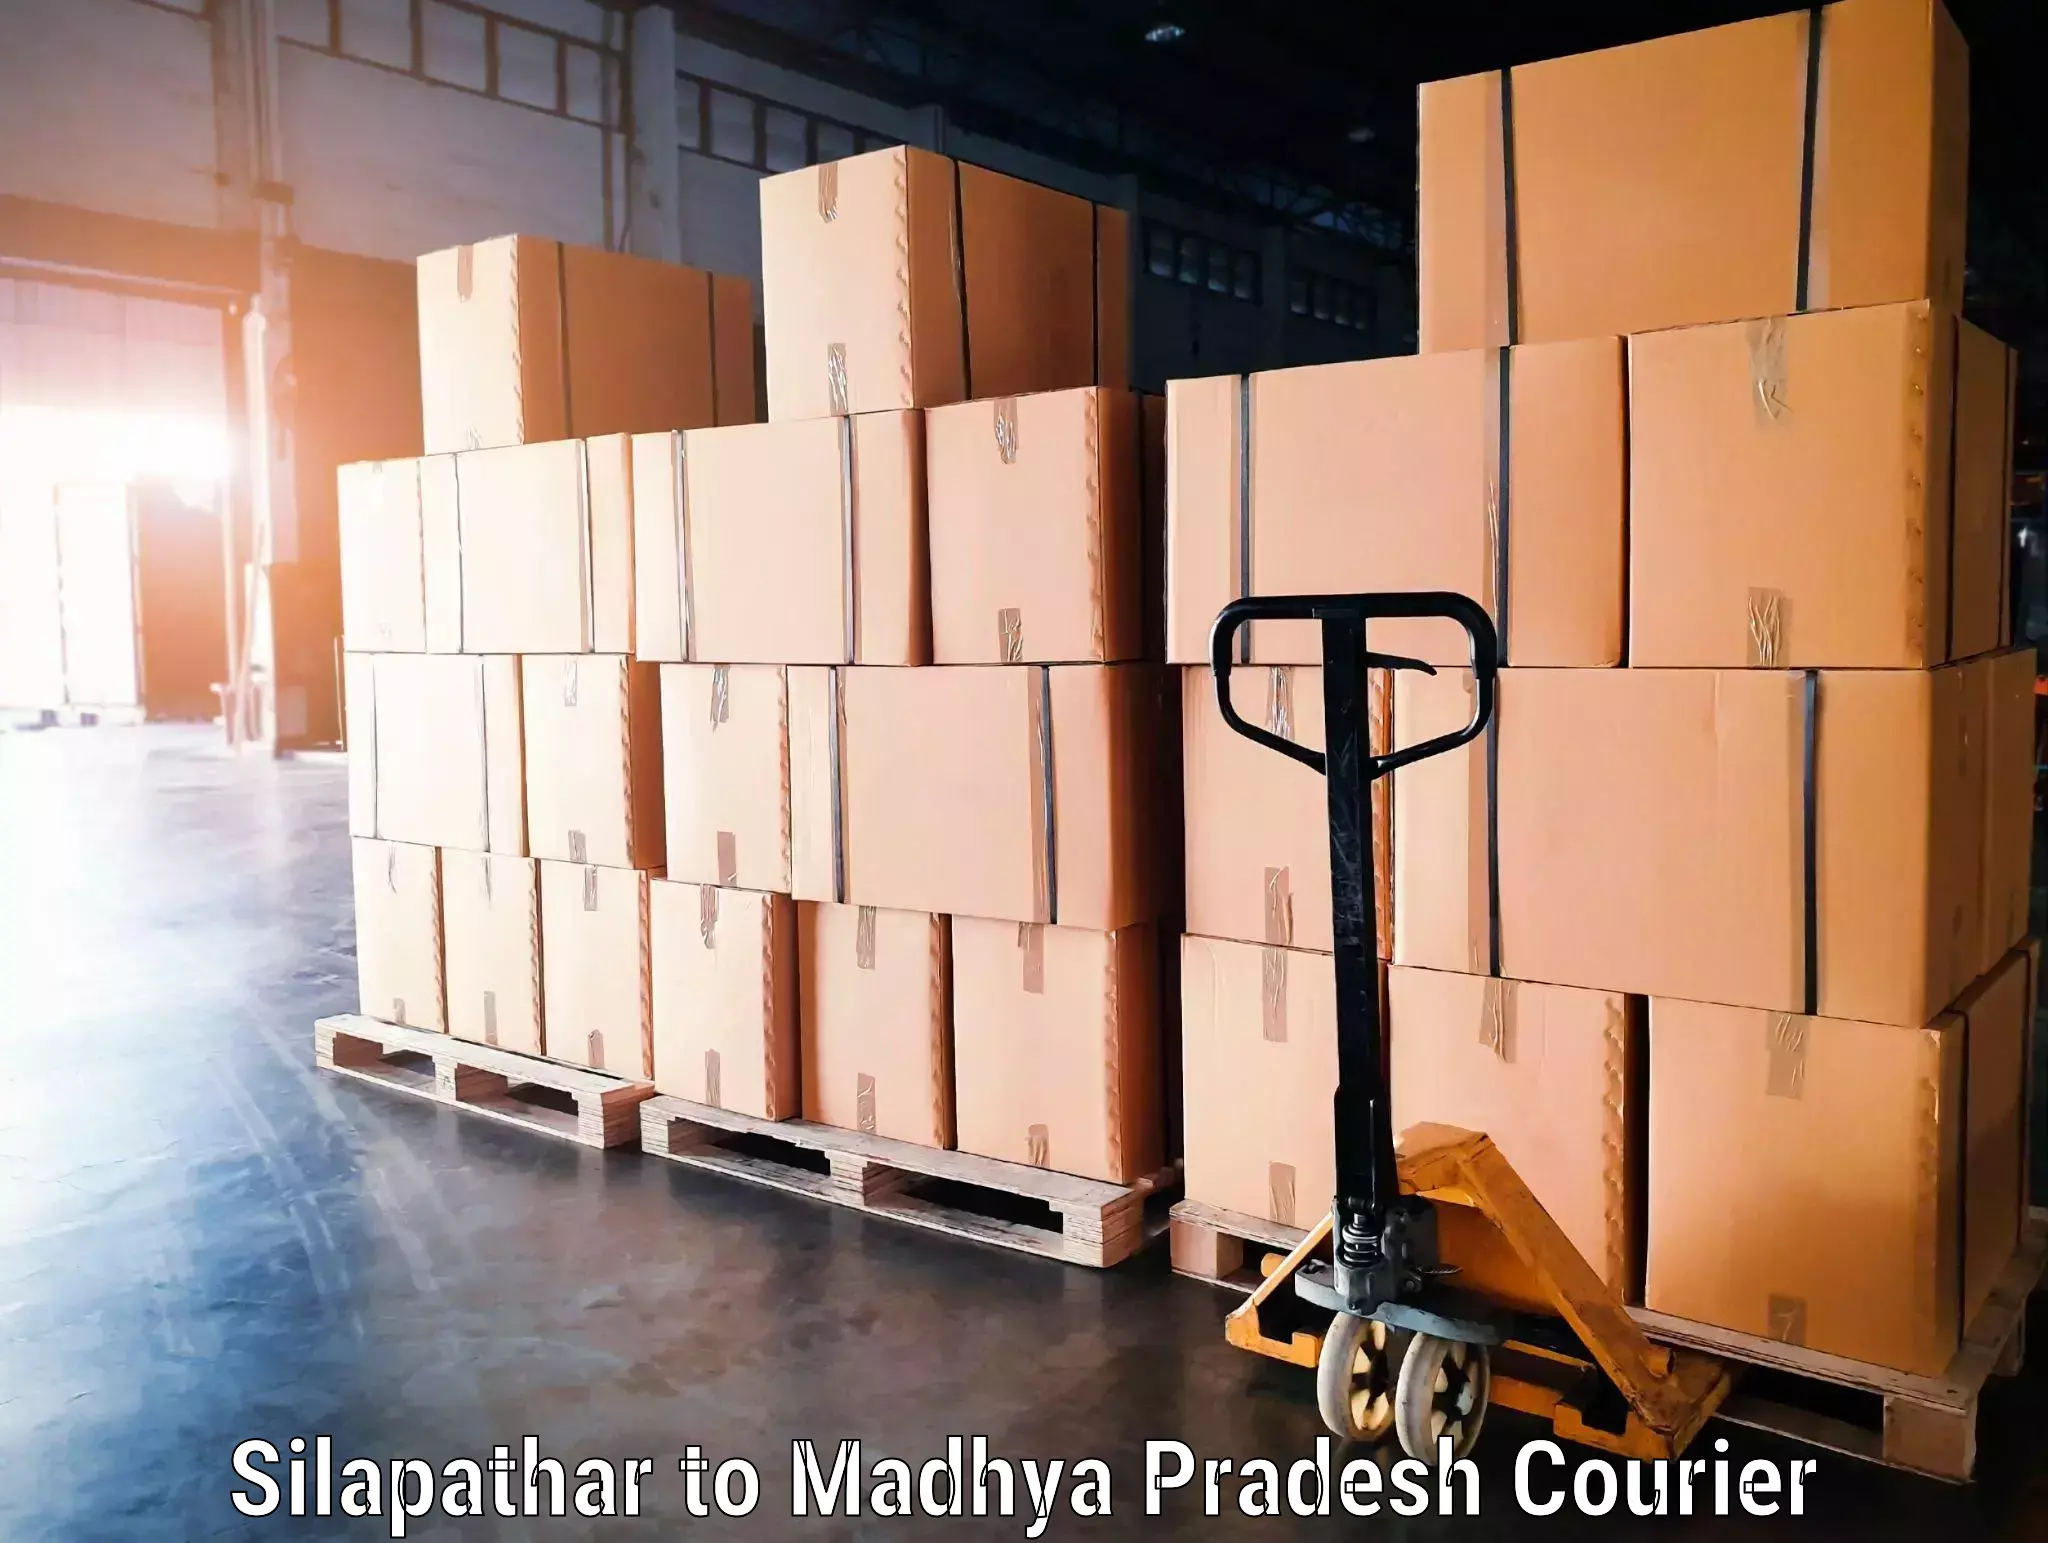 Luggage shipment specialists Silapathar to Beohari